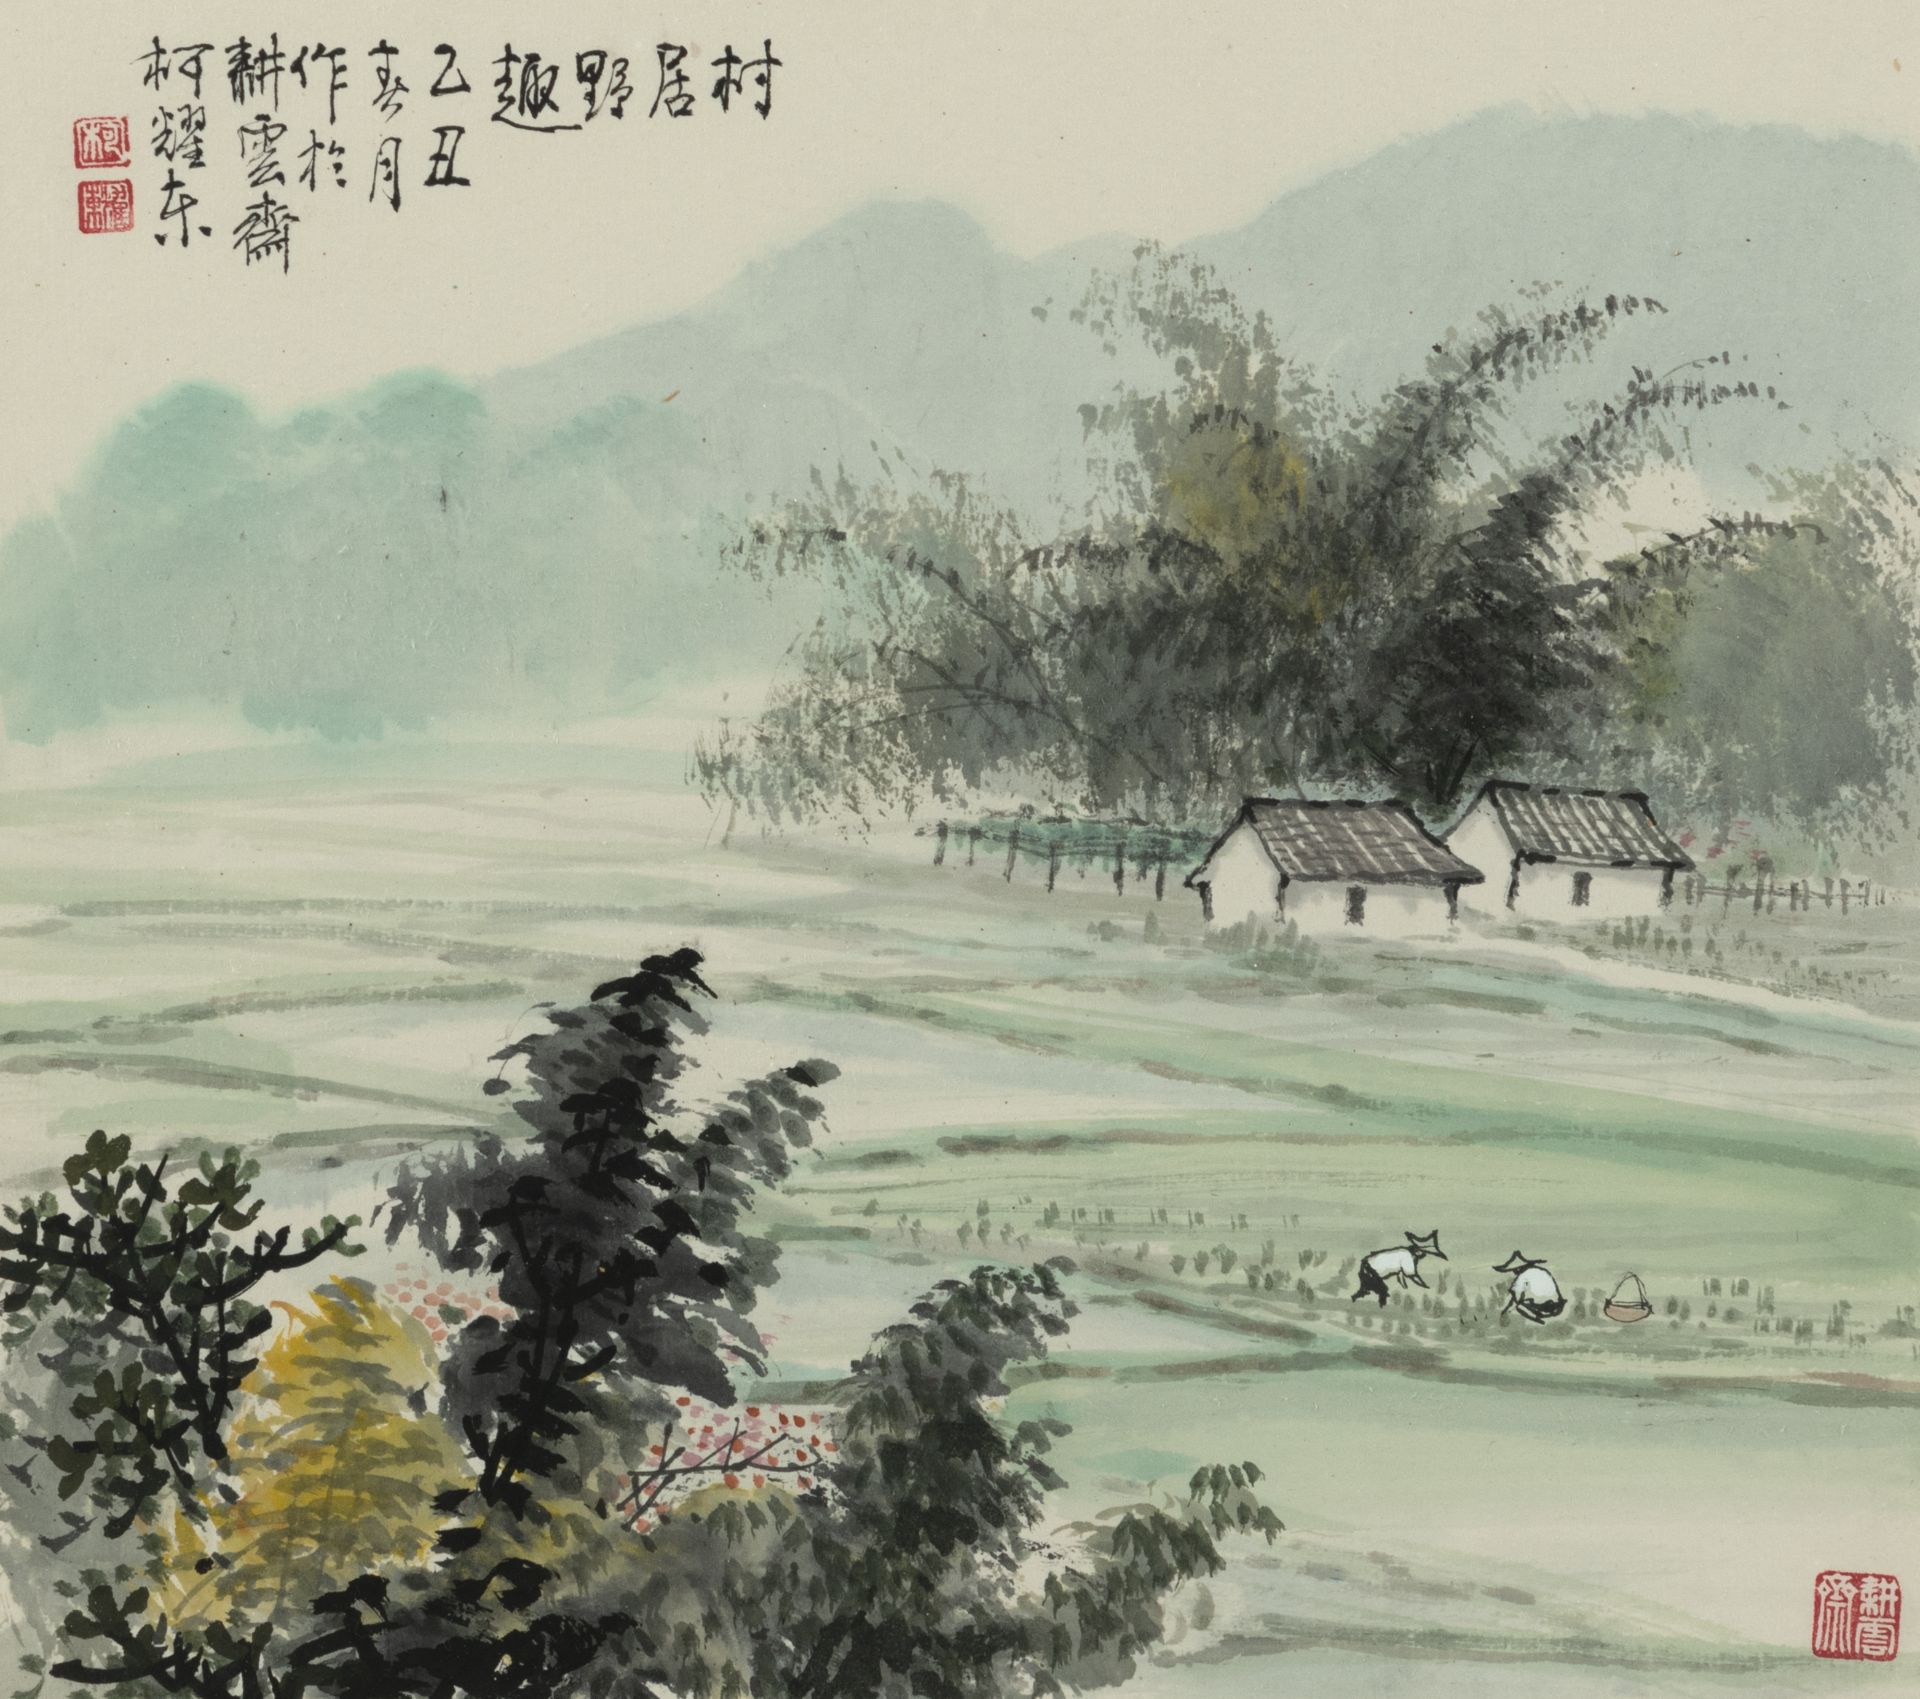 A PAINTING DEPICTING A FIELD LANDSCAPE IN SOUTHERN CHINA BY KE YAODONG (1933-2021). INK AND COLORS